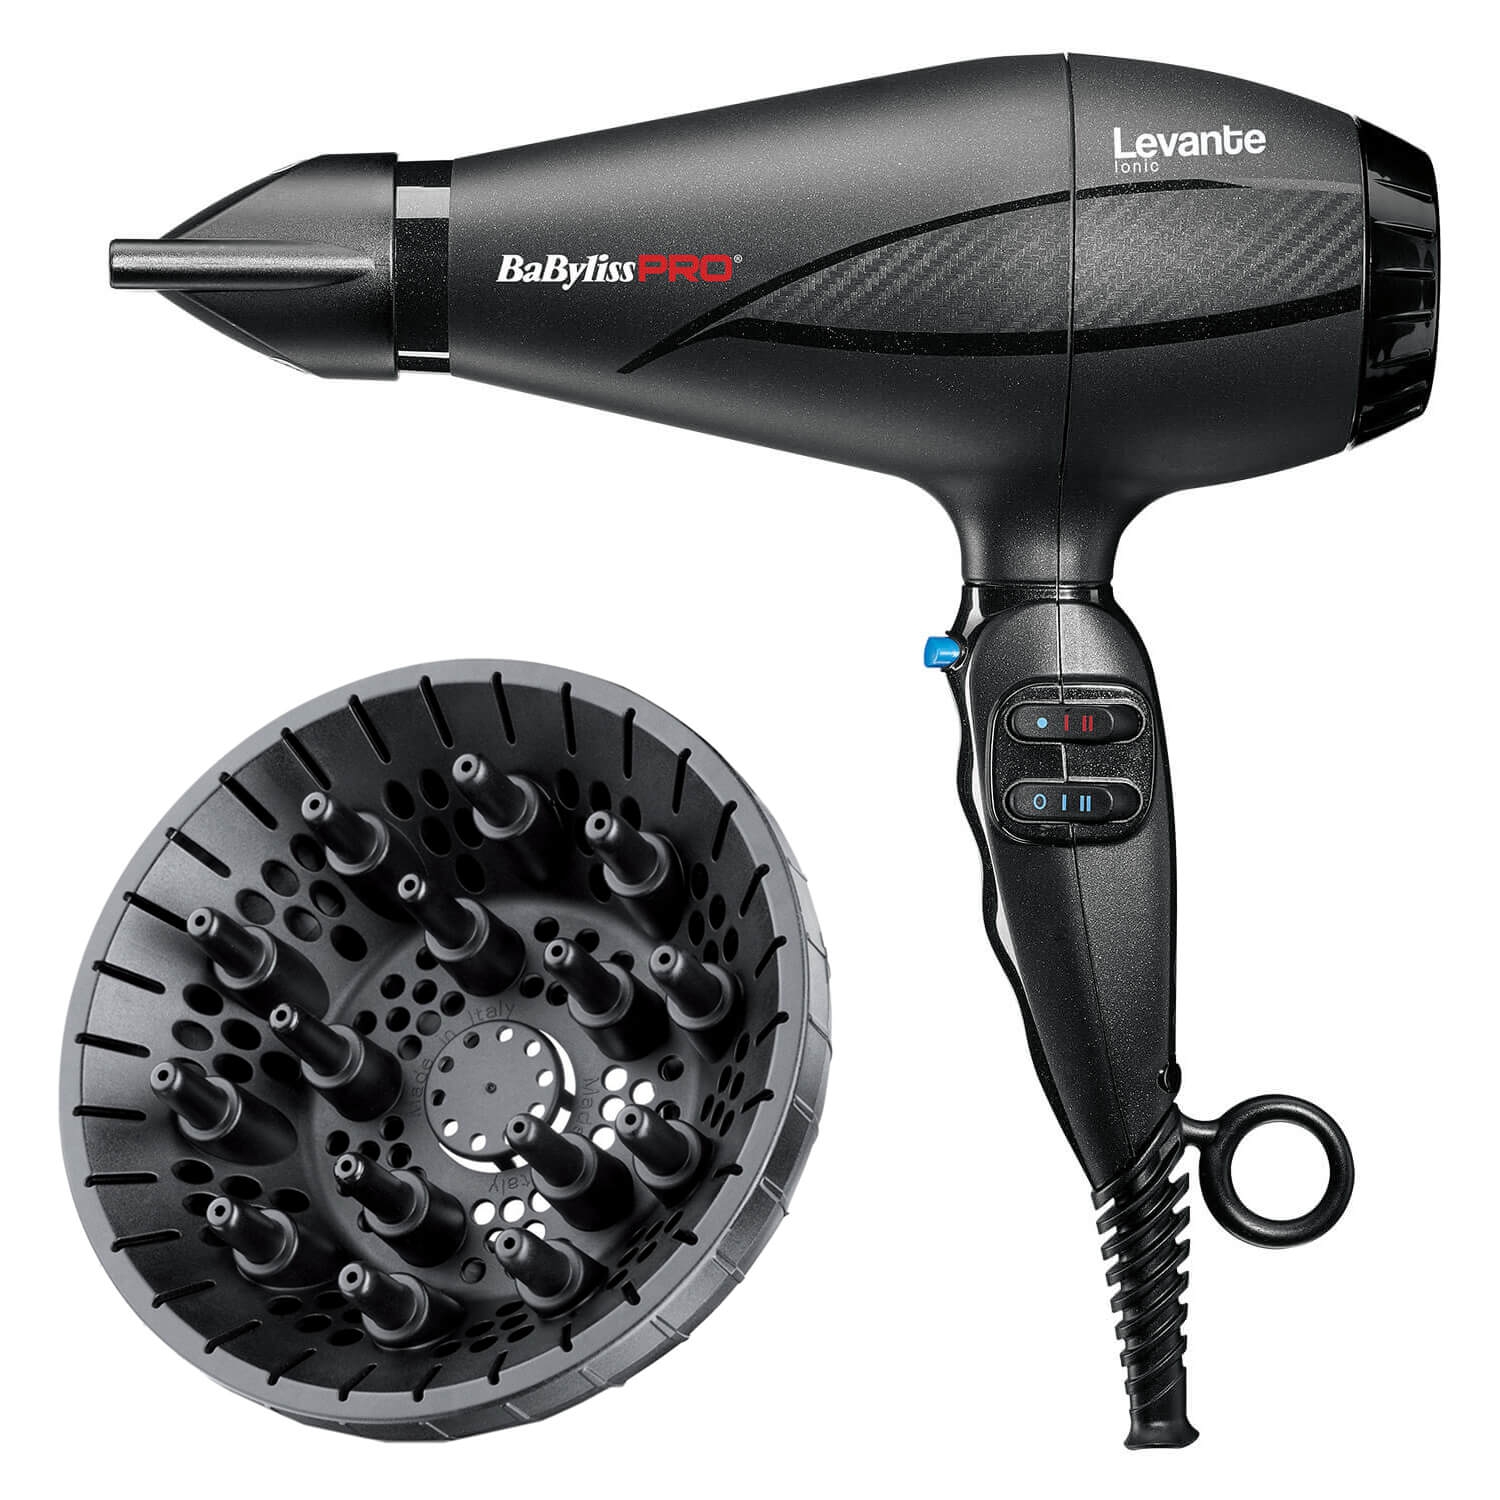 Product image from BaByliss Pro - Levante Professional Hair Dryer BAB6950IE + Diffuser BABD11E